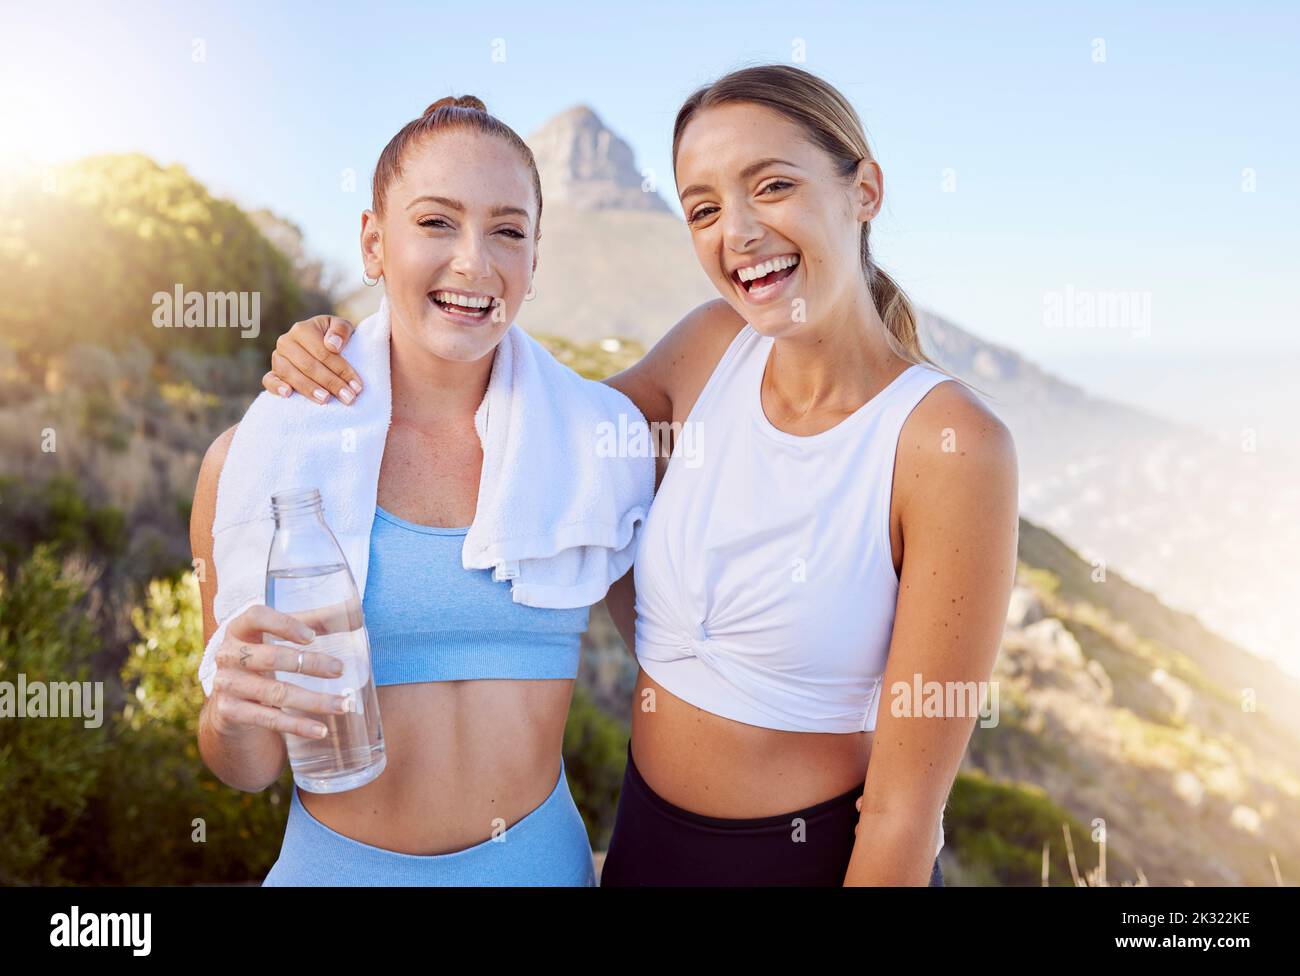 Fitness friends, happy women and exercise with water bottle while out hiking, running and training for health, happiness and wellness. Female portrait Stock Photo